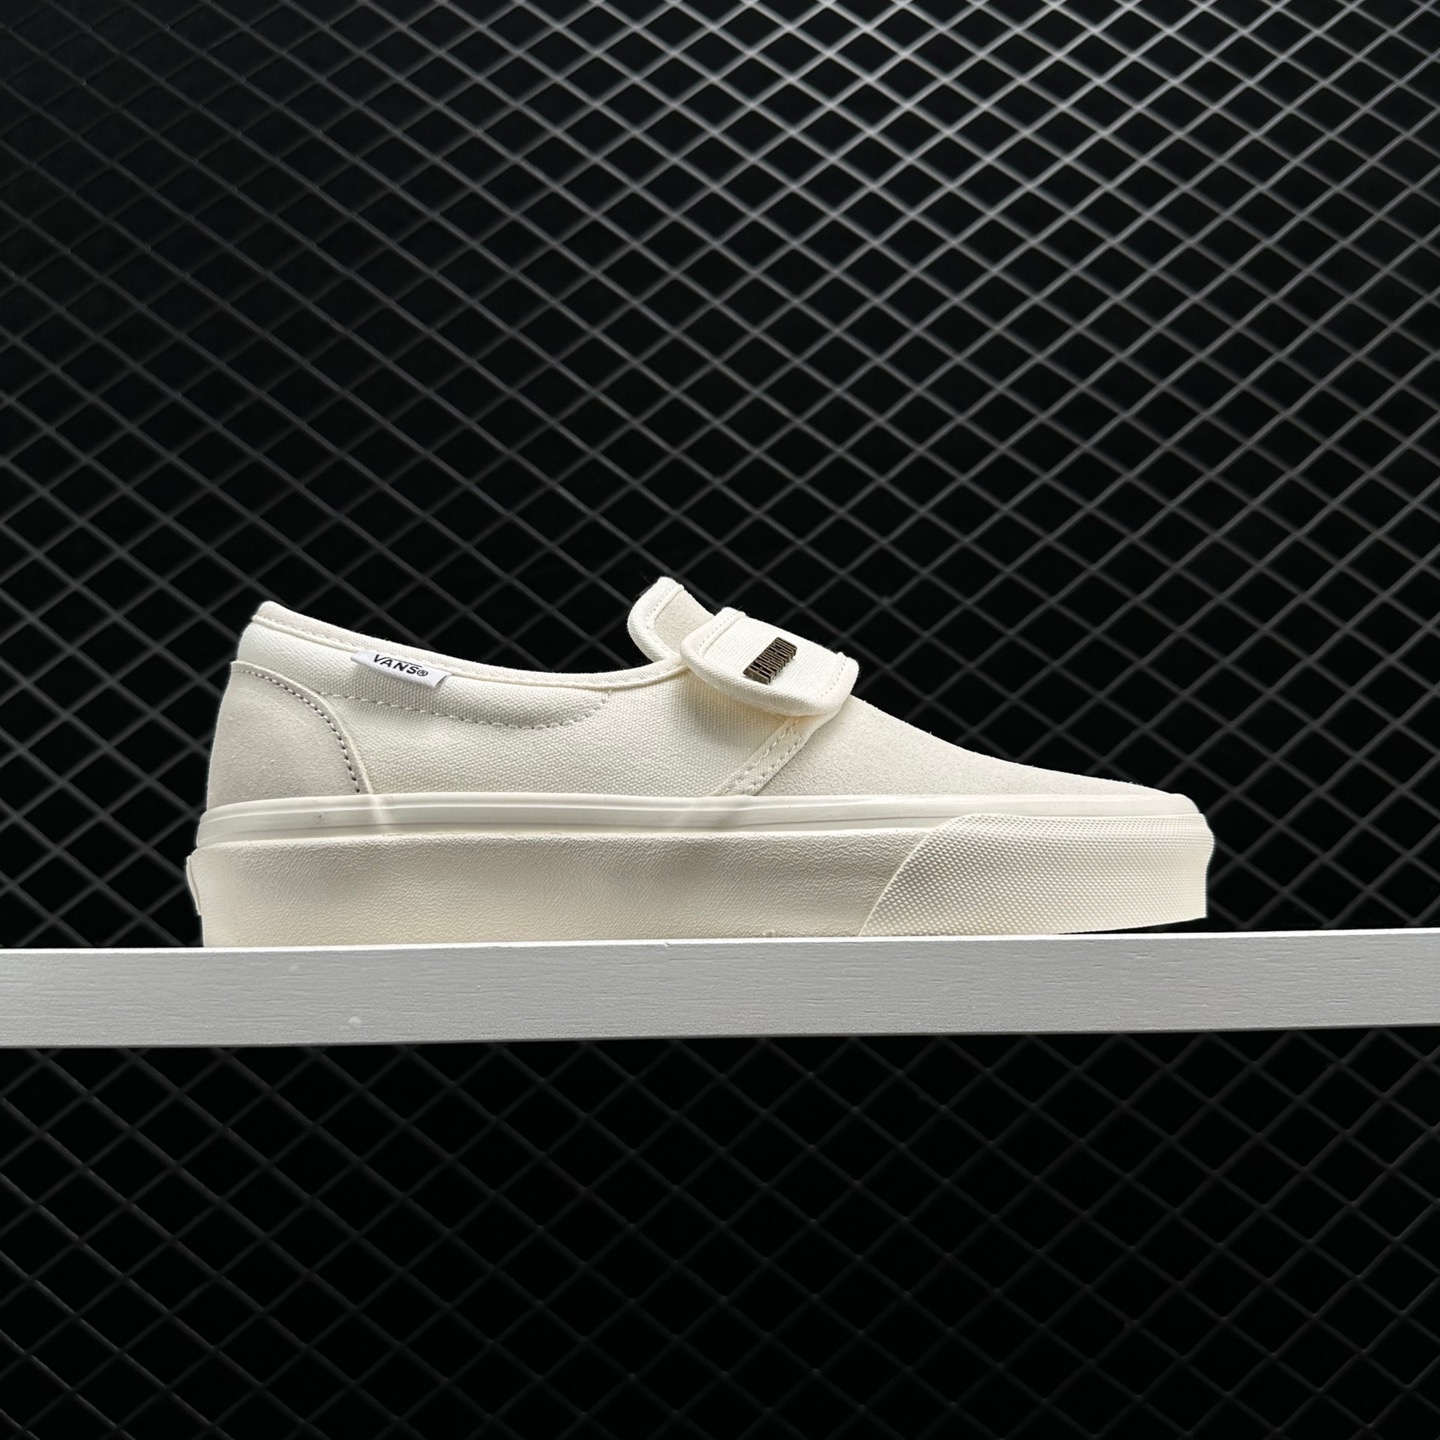 Vans Fear Of God X Slip-On 47 DX White - Stylish and Iconic Sneakers